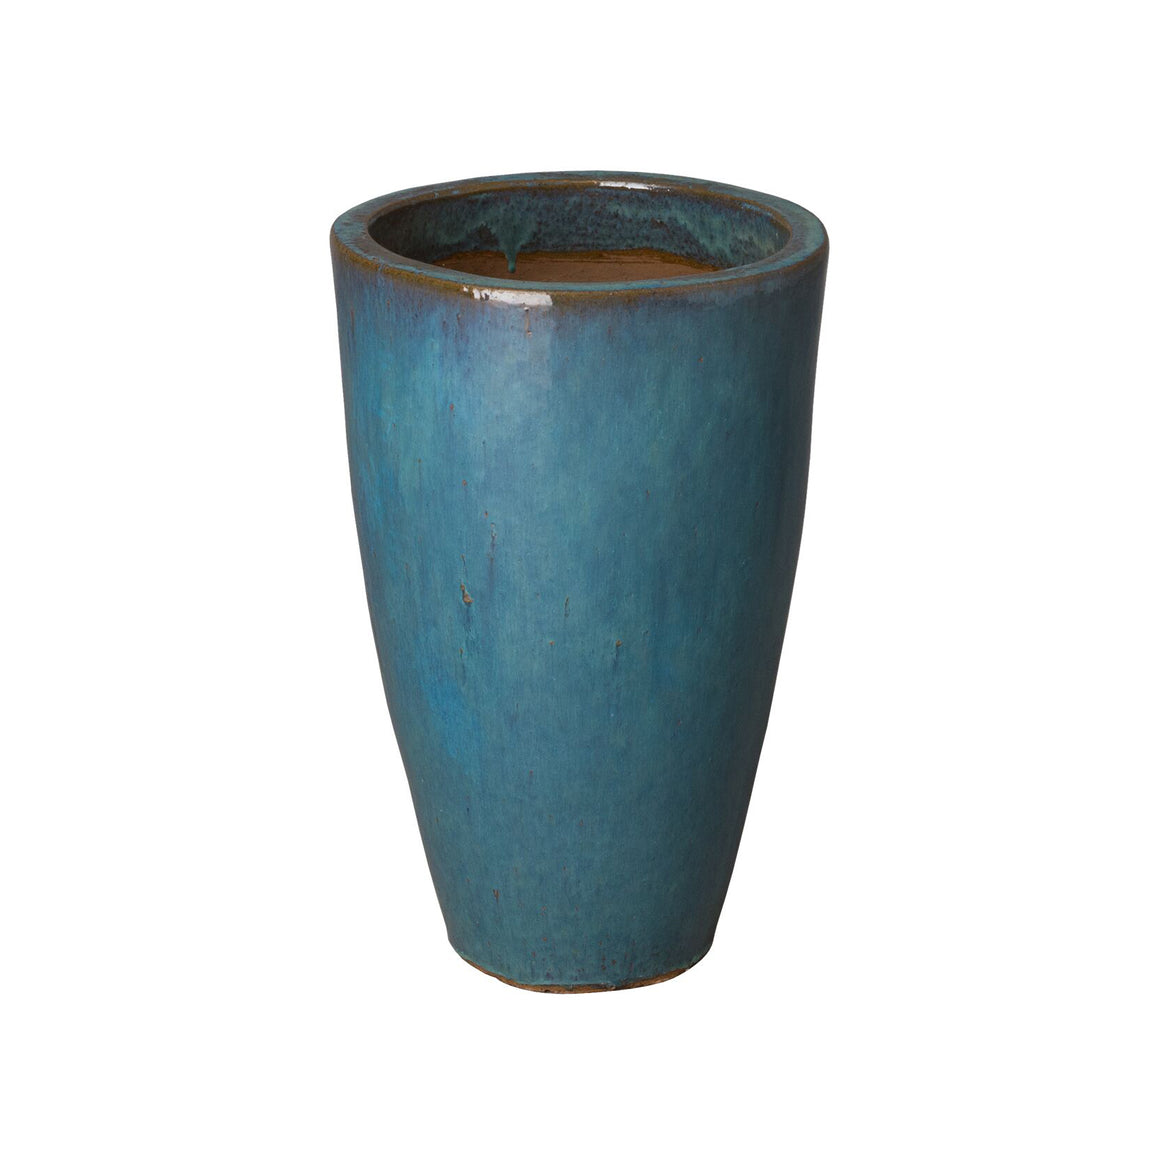 Small Tapered Round Planter with Teal Glaze